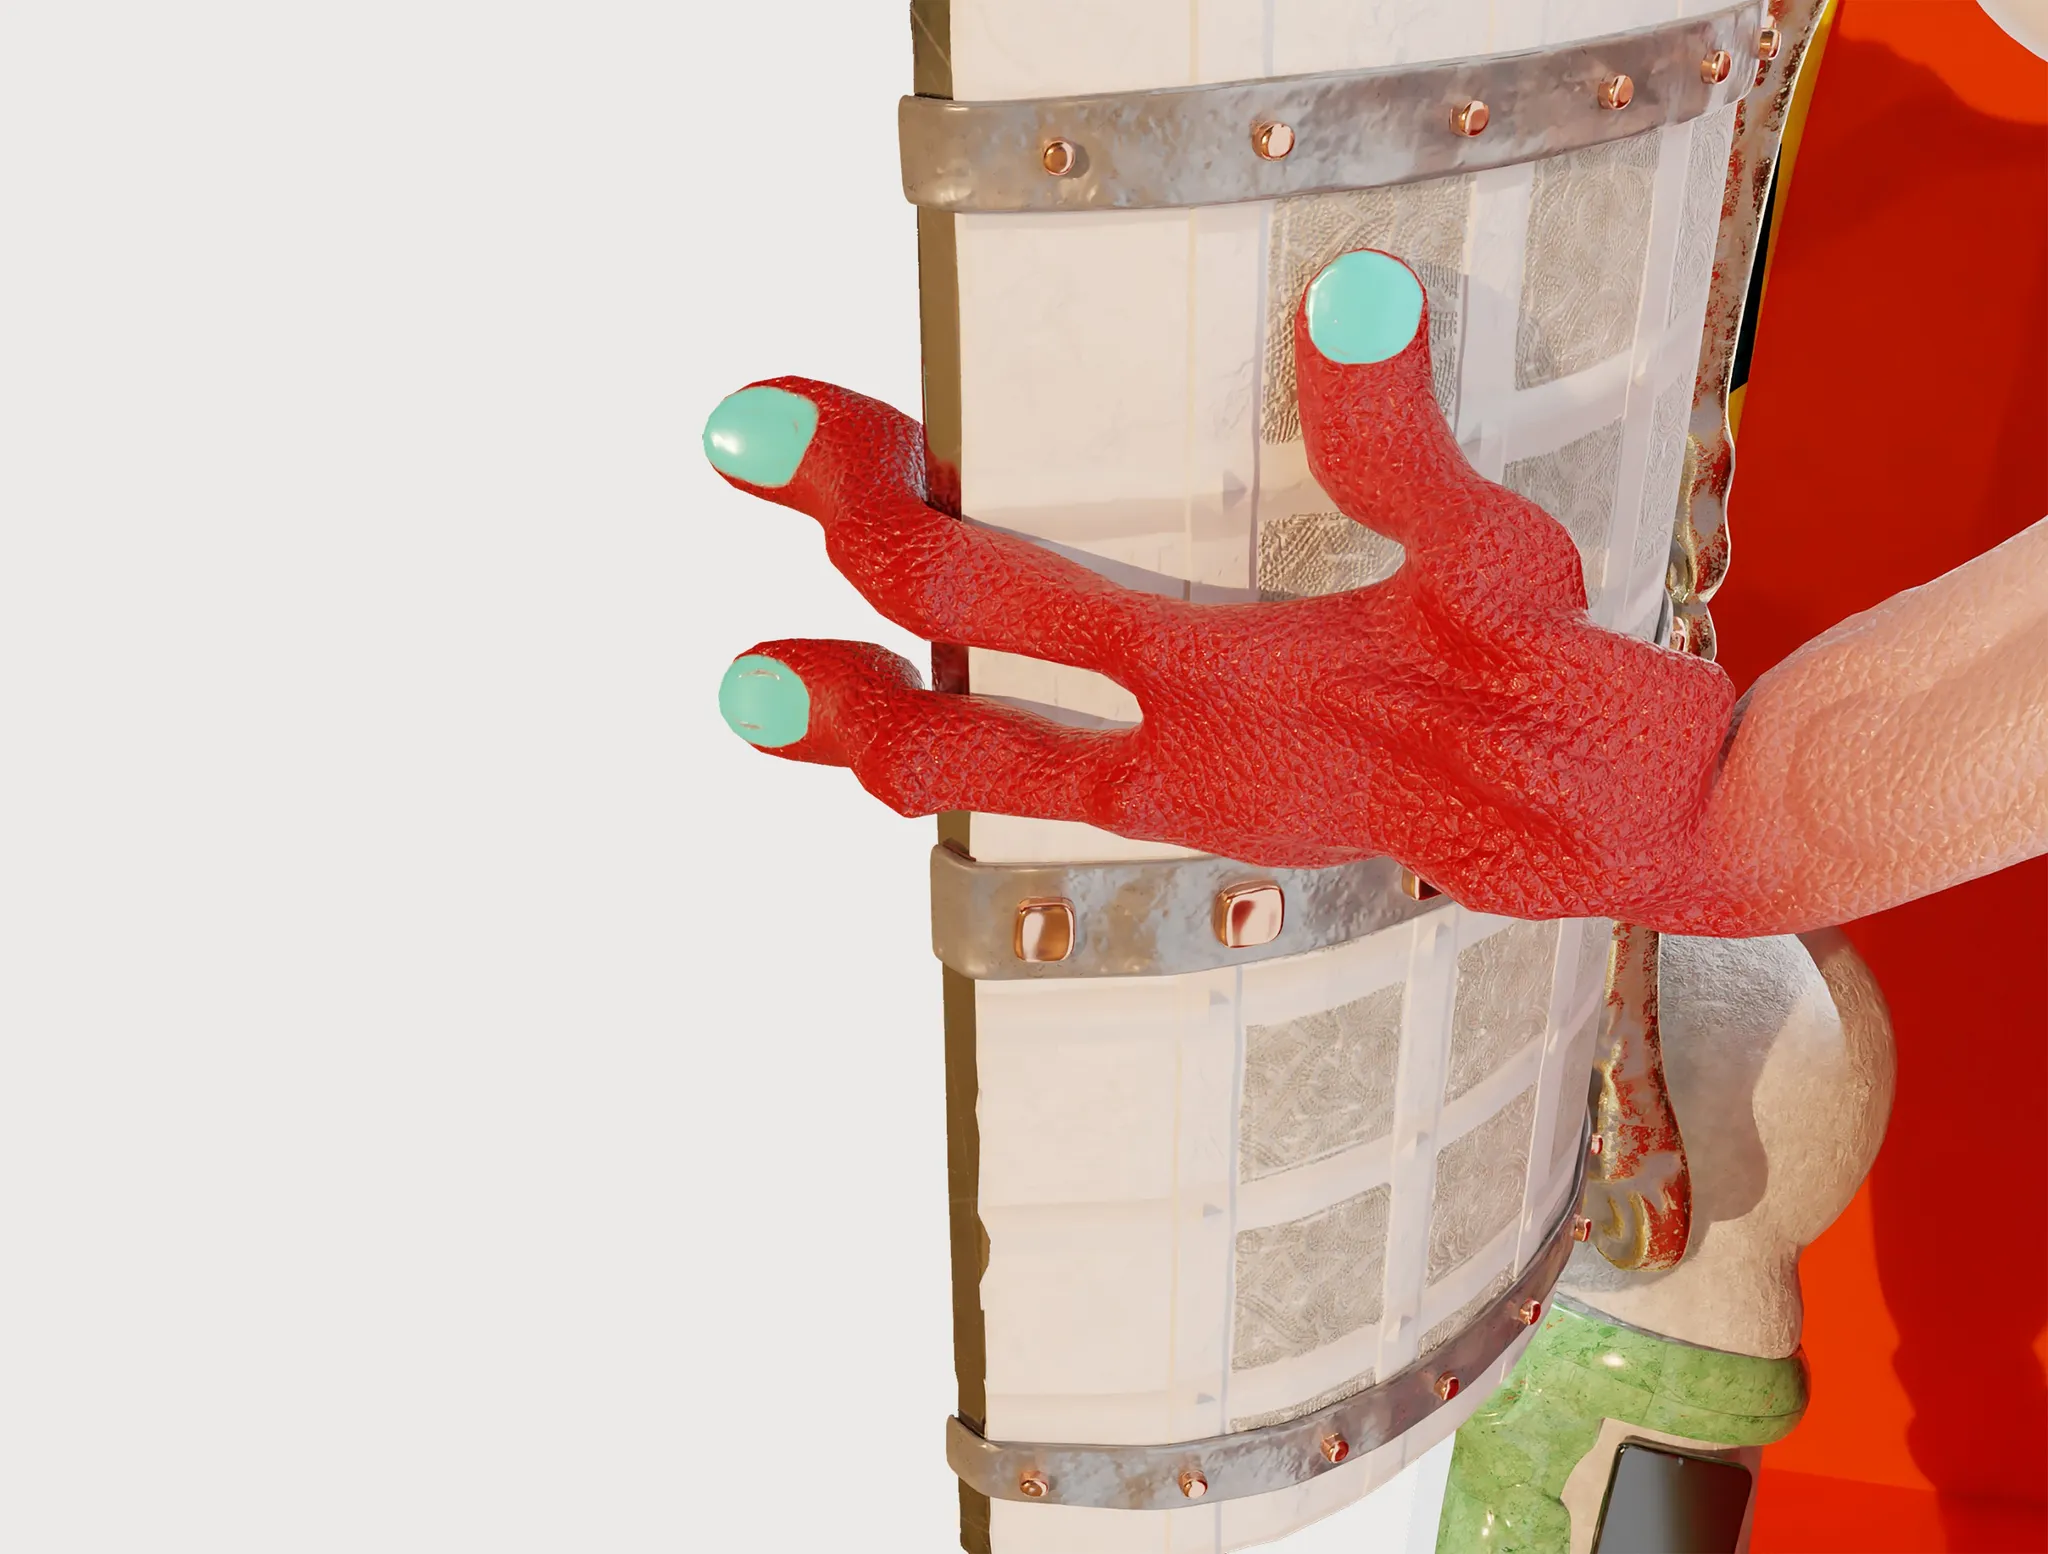 a red hand with three fingers opening a studded door